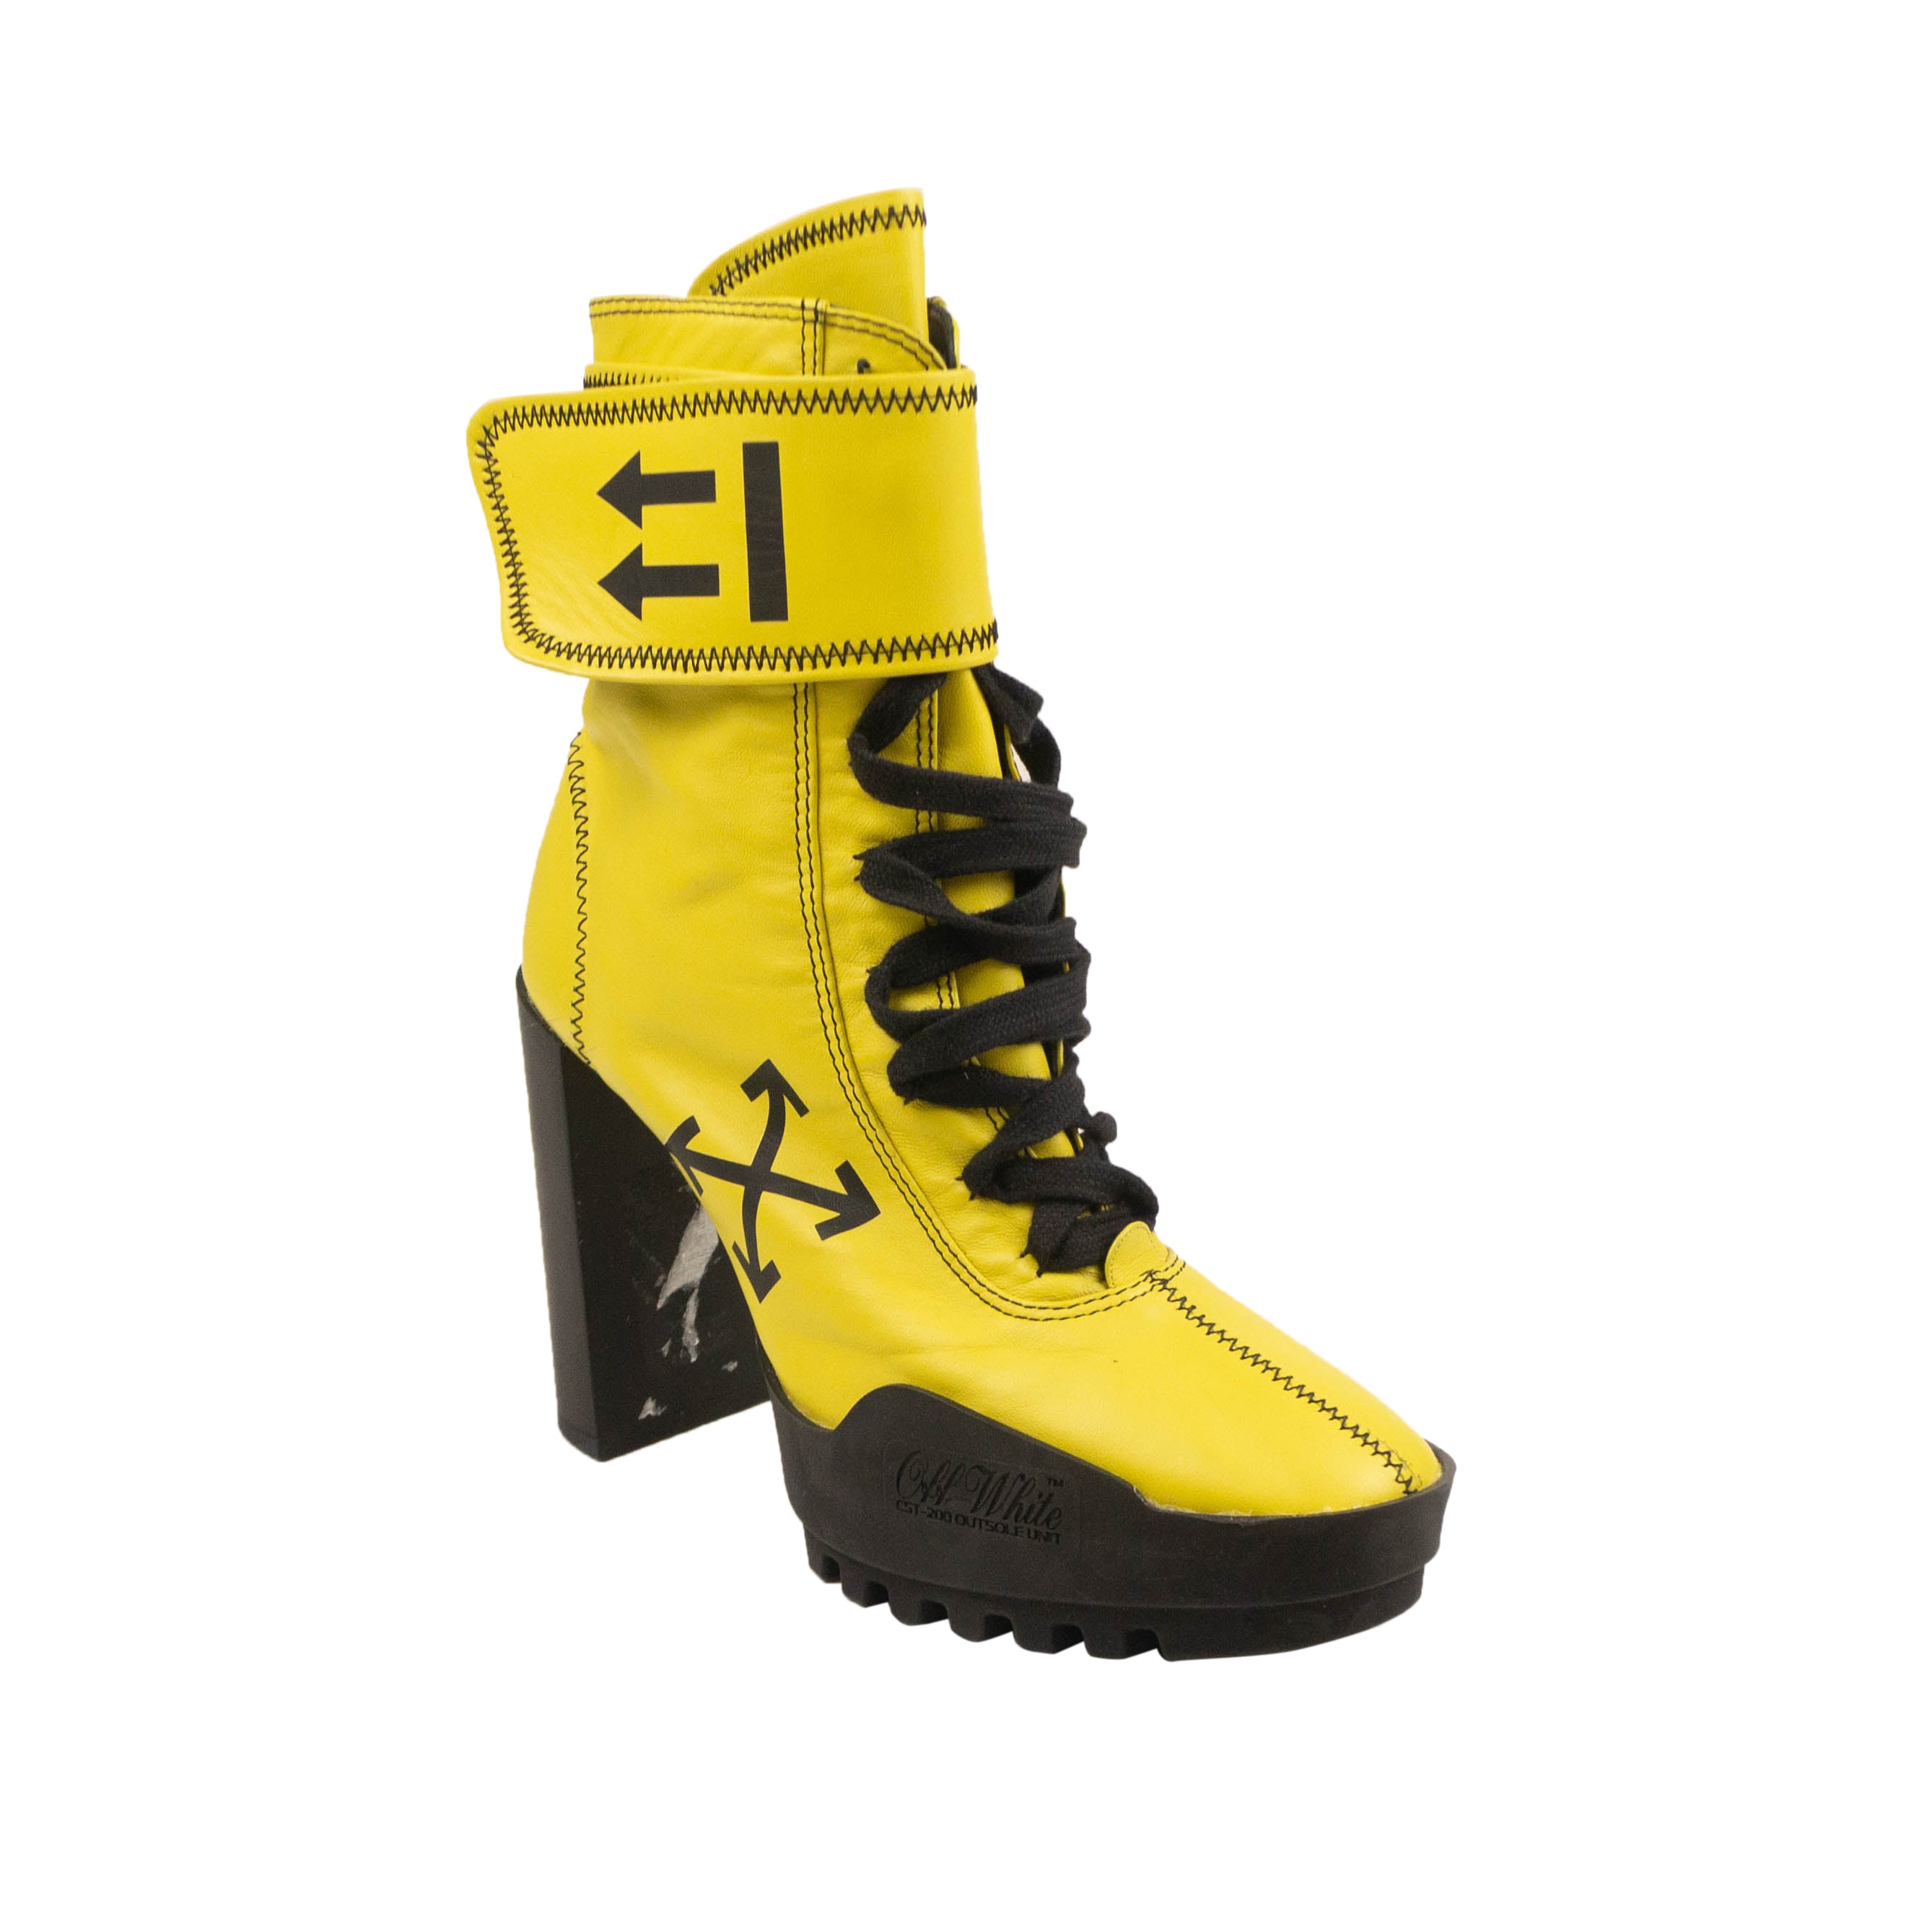 Off-White C/O Virgil Abloh Leather Moto Wrap Boots - Yellow